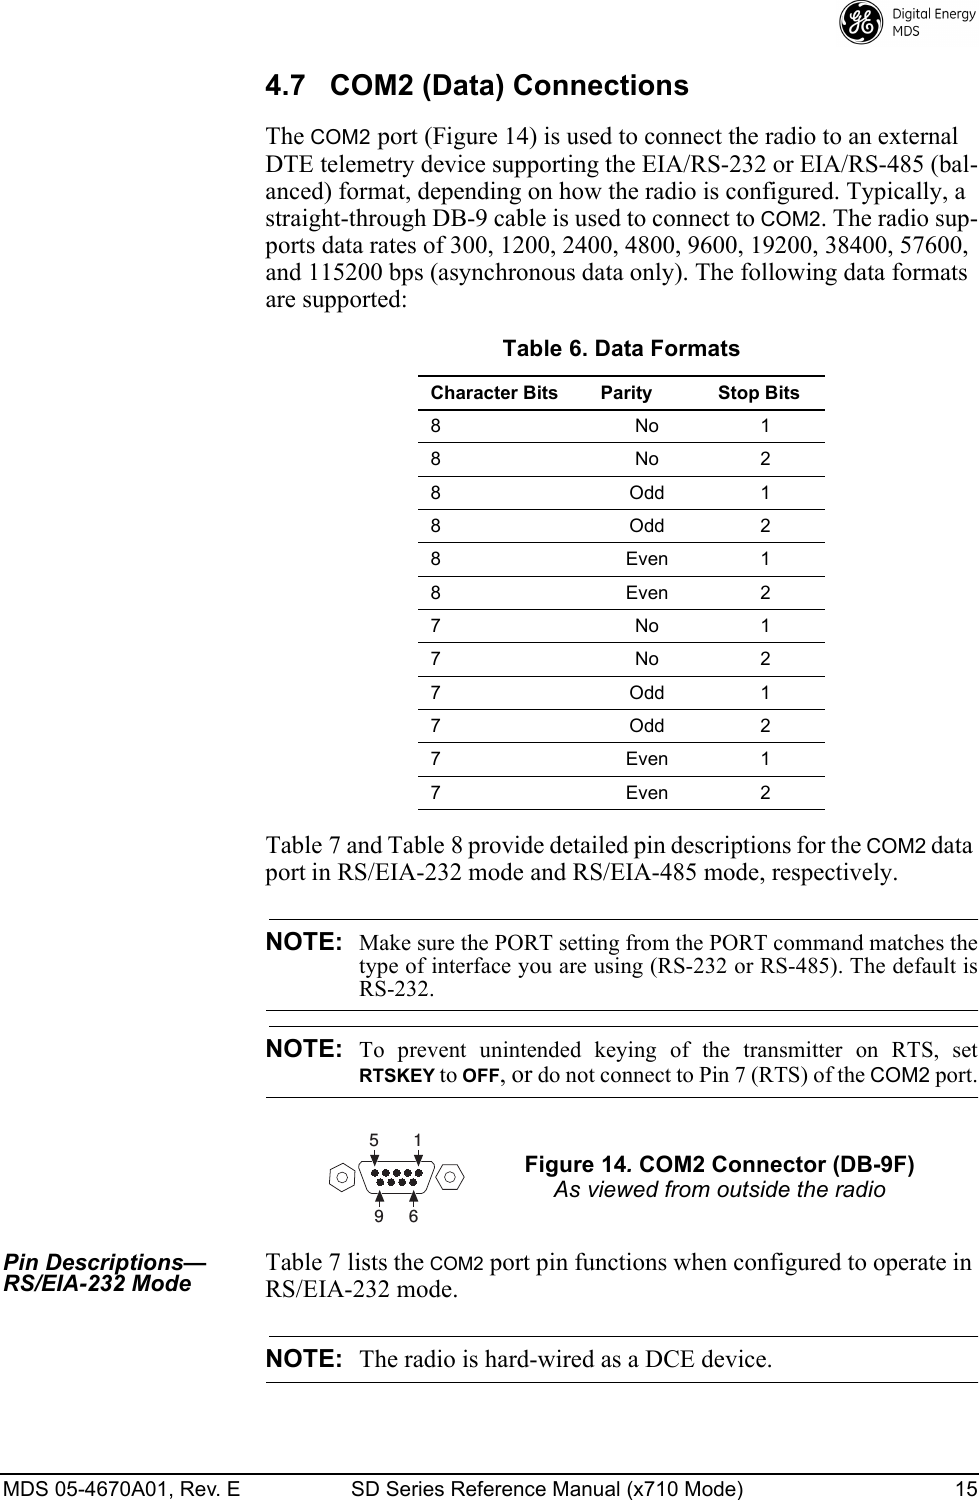 MDS 05-4670A01, Rev. E SD Series Reference Manual (x710 Mode) 15 4.7 COM2 (Data) ConnectionsThe COM2 port (Figure 14) is used to connect the radio to an external DTE telemetry device supporting the EIA/RS-232 or EIA/RS-485 (bal-anced) format, depending on how the radio is configured. Typically, a straight-through DB-9 cable is used to connect to COM2. The radio sup-ports data rates of 300, 1200, 2400, 4800, 9600, 19200, 38400, 57600, and 115200 bps (asynchronous data only). The following data formats are supported:Table 7 and Table 8 provide detailed pin descriptions for the COM2 data port in RS/EIA-232 mode and RS/EIA-485 mode, respectively.NOTE:Make sure the PORT setting from the PORT command matches thetype of interface you are using (RS-232 or RS-485). The default isRS-232.NOTE:To  prevent  unintended  keying  of  the  transmitter  on  RTS,  setRTSKEY to OFF, or do not connect to Pin 7 (RTS) of the COM2 port.Pin Descriptions—RS/EIA-232 ModeTable 7 lists the COM2 port pin functions when configured to operate in RS/EIA-232 mode.NOTE: The radio is hard-wired as a DCE device.Table 6. Data FormatsCharacter Bits Parity Stop Bits8 No 18 No 28 Odd 18 Odd 28 Even 18 Even 27 No 17 No 27 Odd 17 Odd 27 Even 17 Even 2Figure 14. COM2 Connector (DB-9F)As viewed from outside the radio59 61